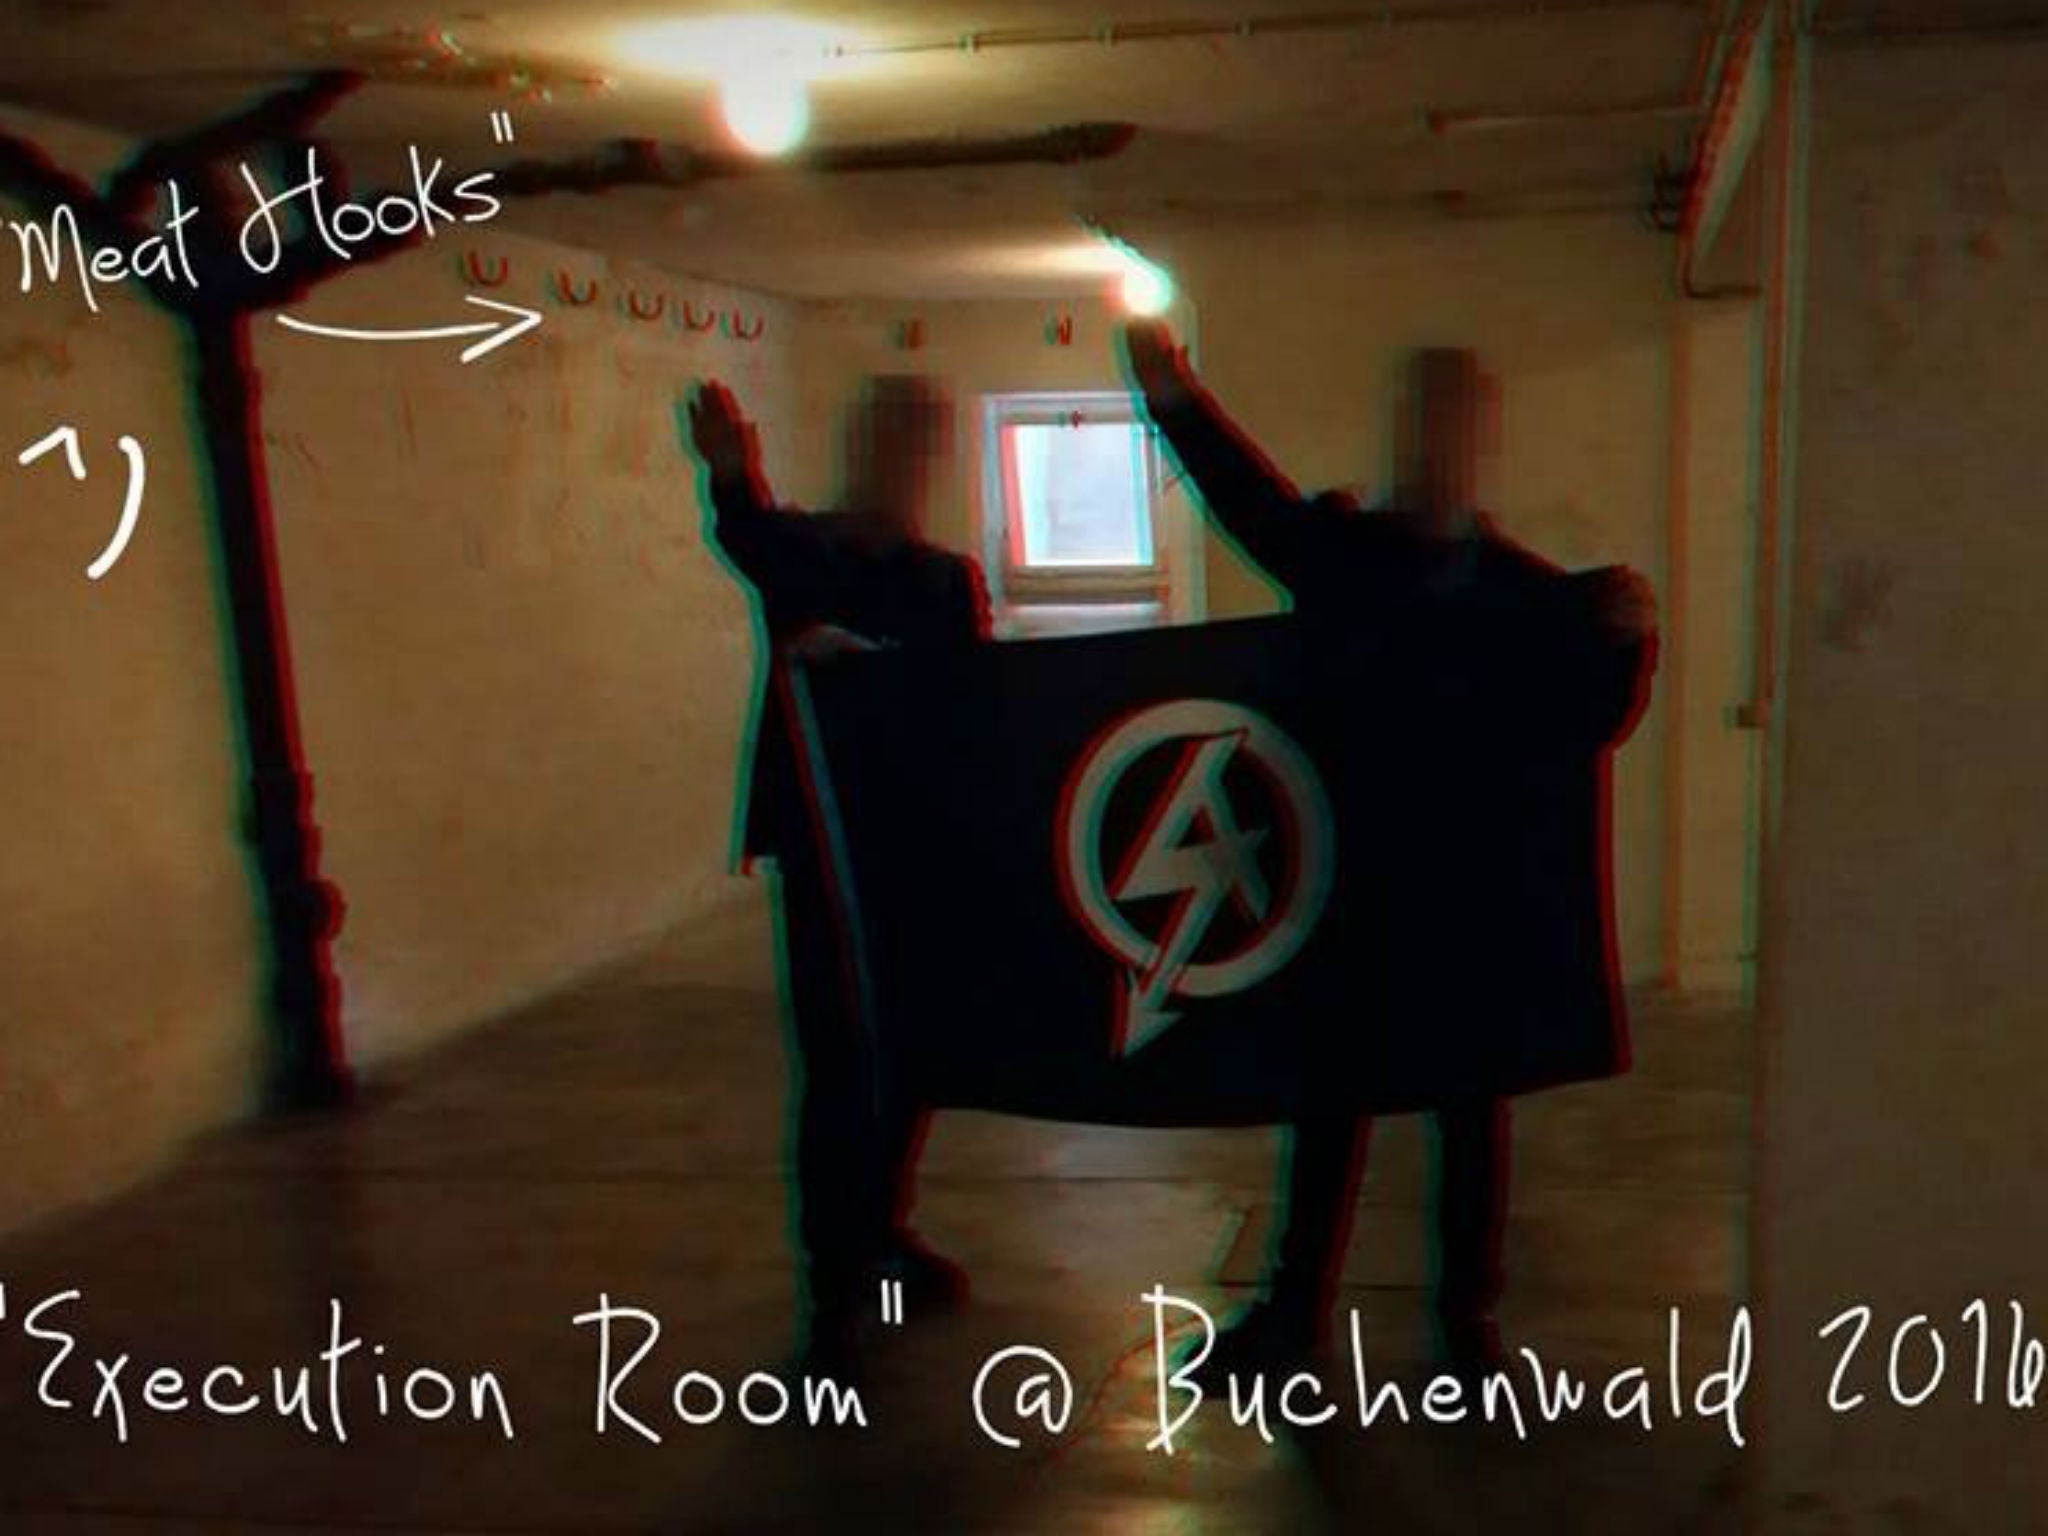 National Action shared a photo of Jones and Davies performing Hitler salutes at a Nazi concentration camp in 2016